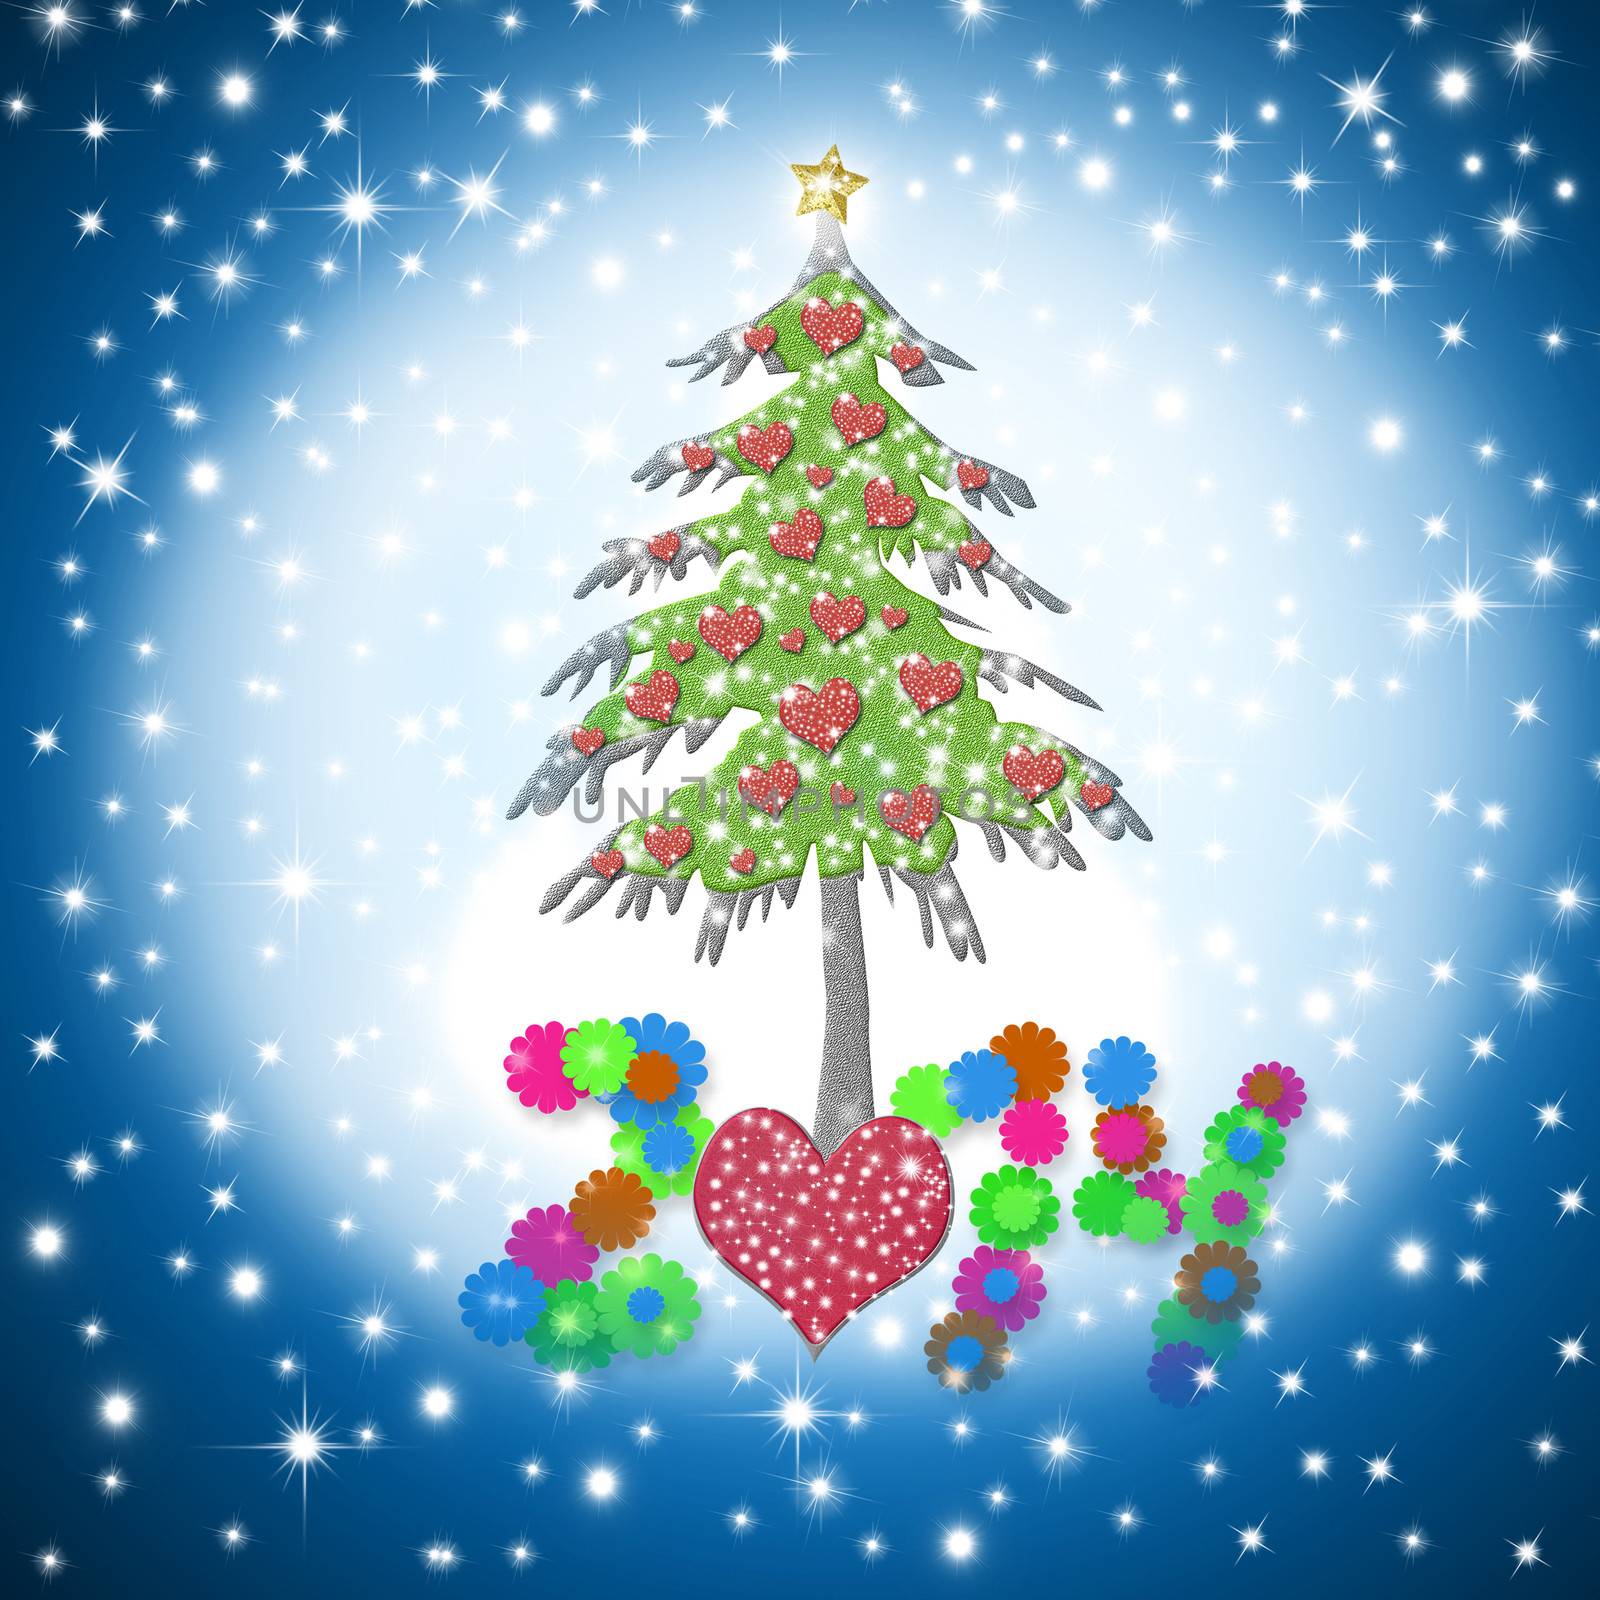 beautiful Christmas card 2014 with shiny hearts tree on starry sky background